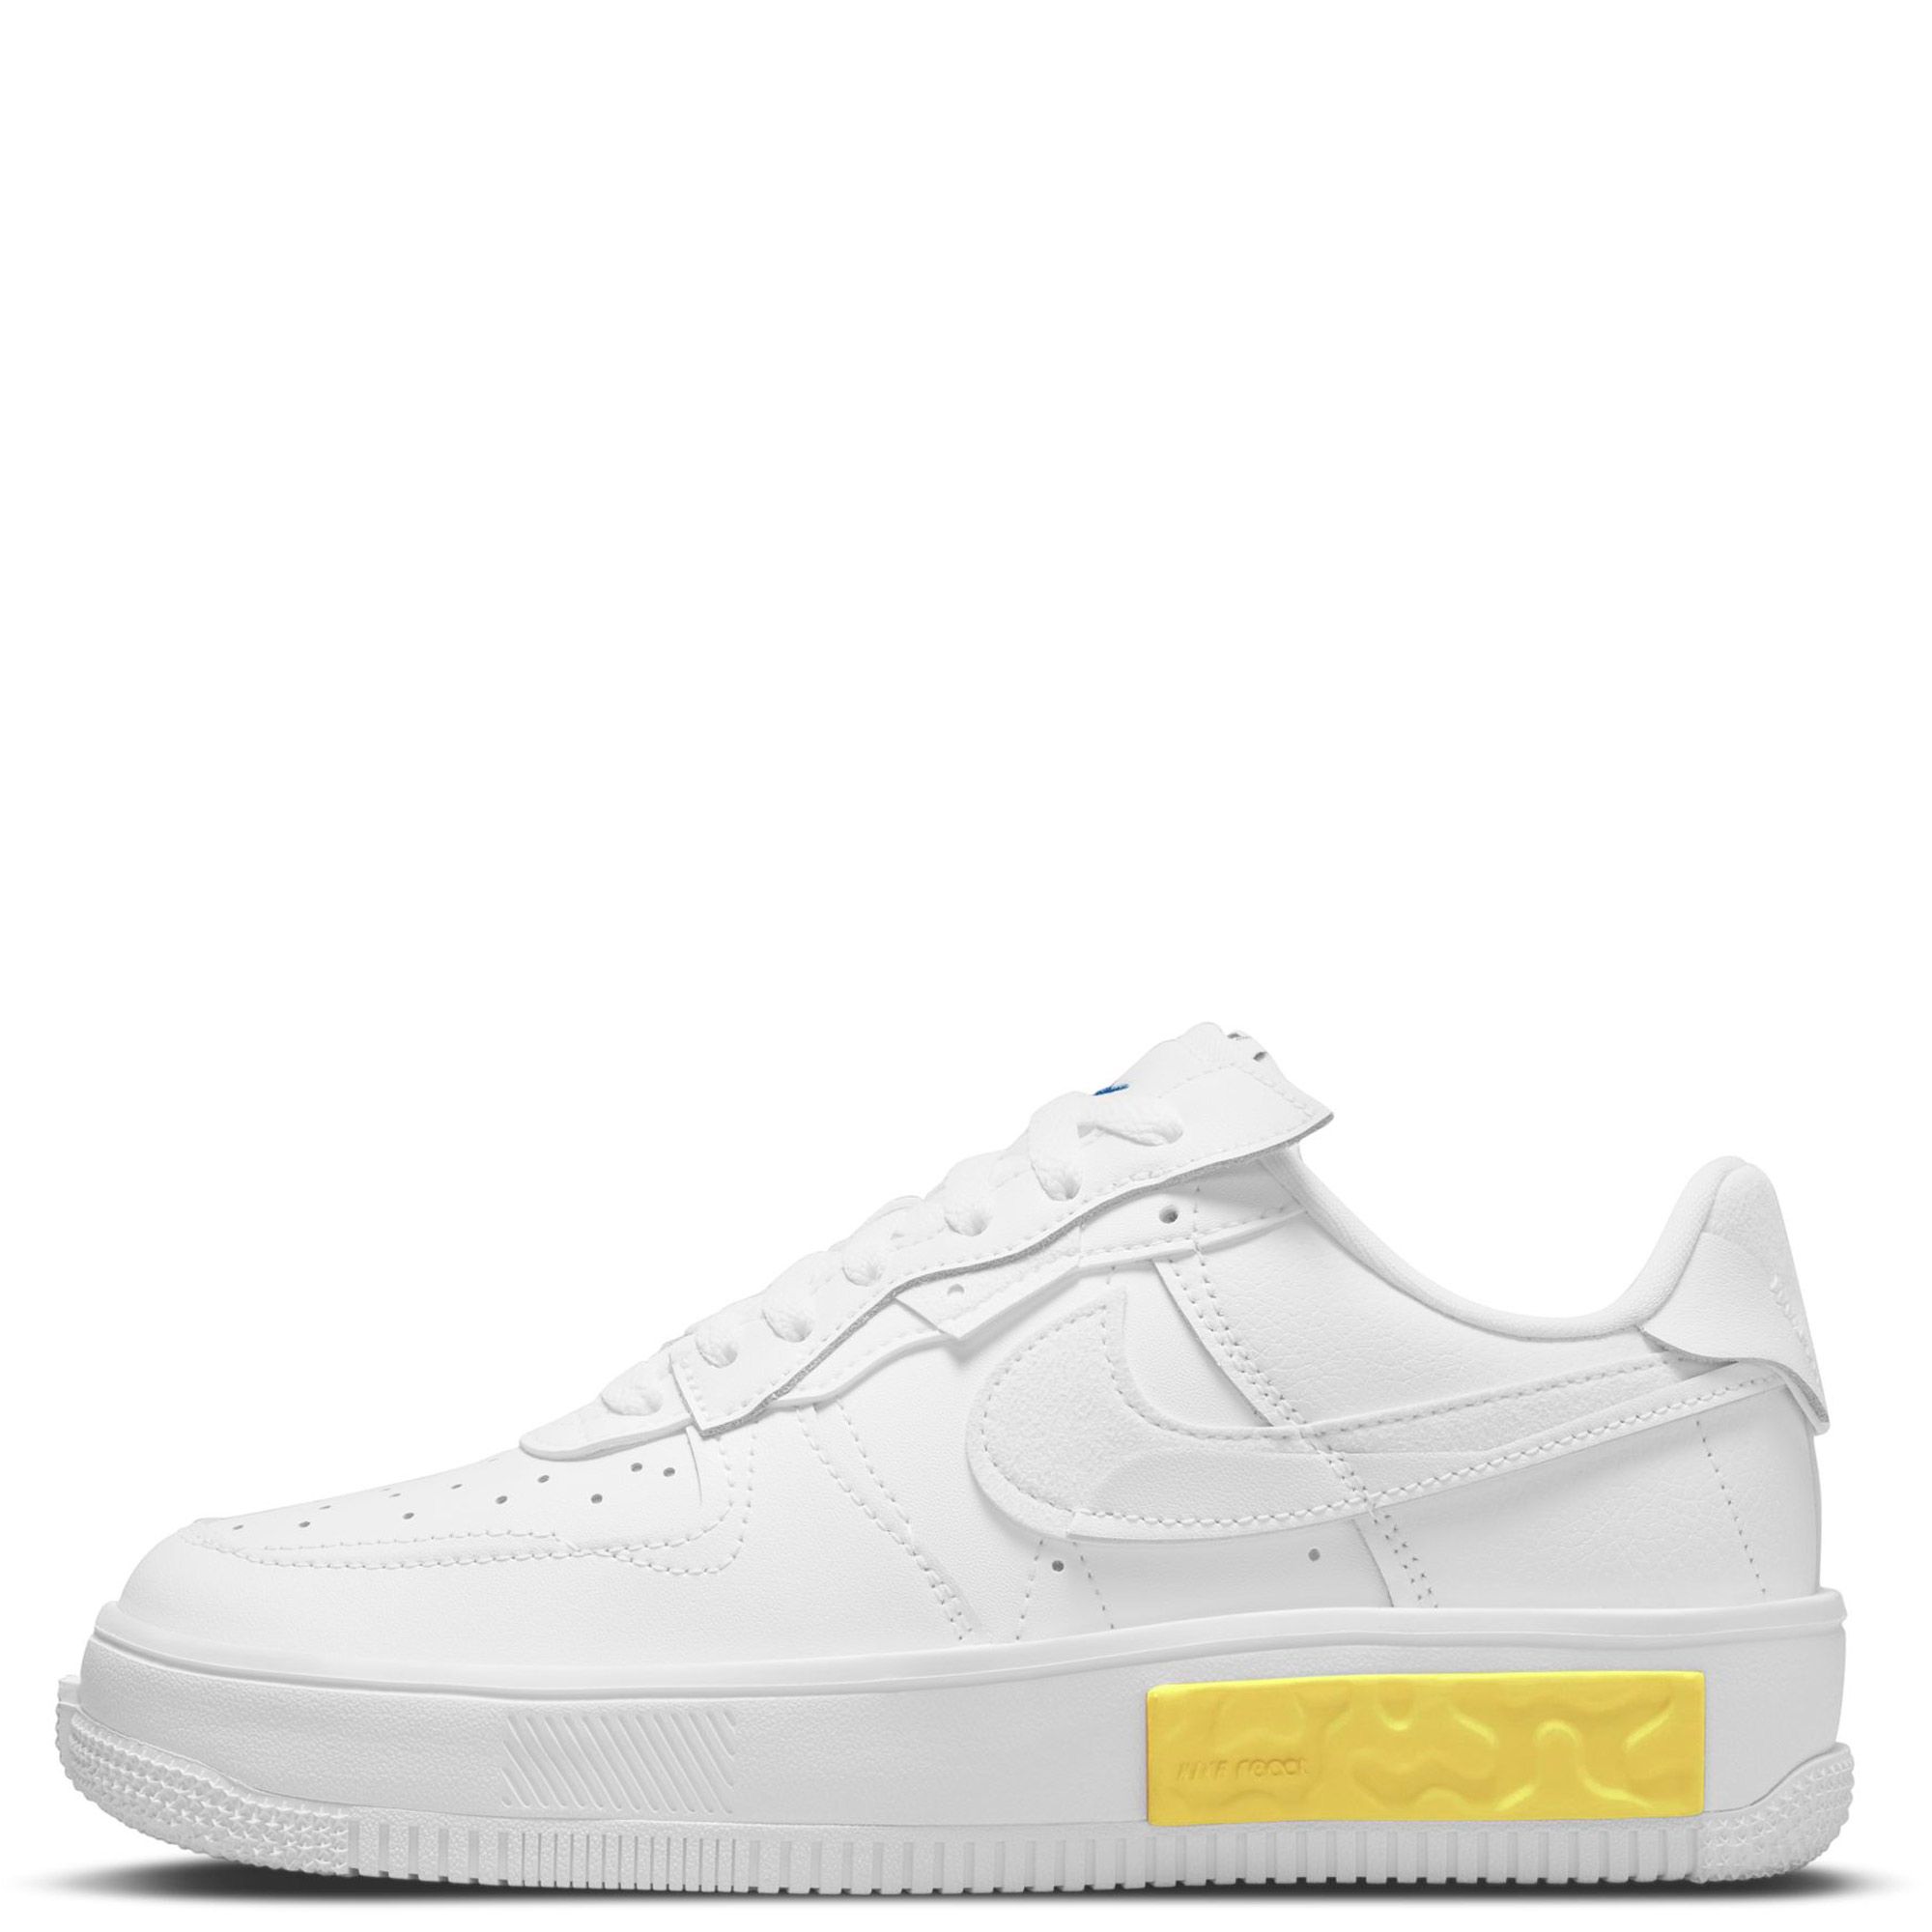 It's the New Style: Nike Air Force 1